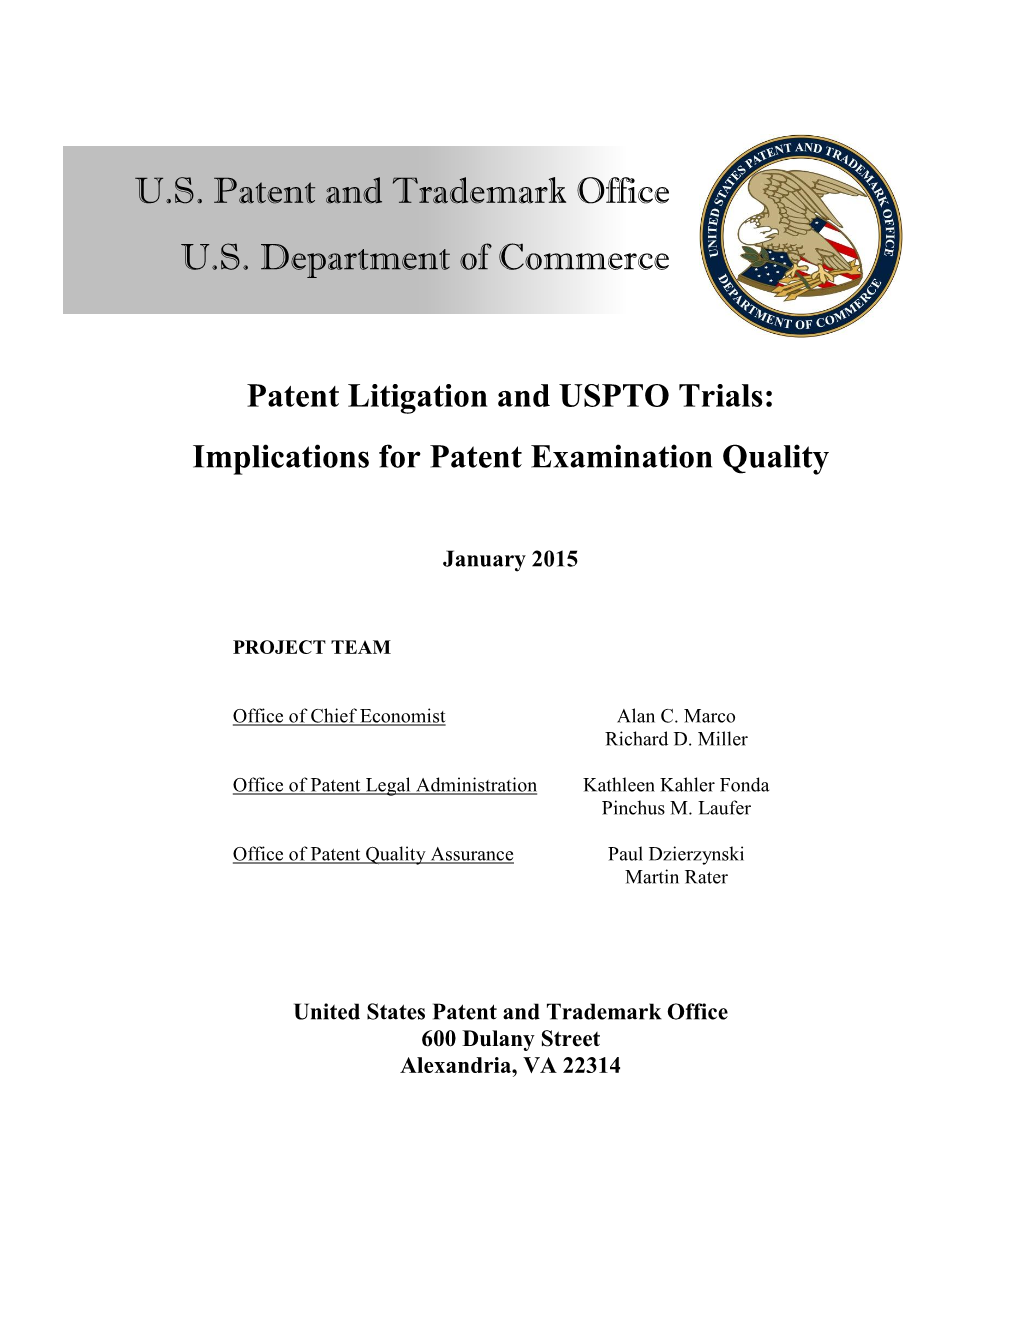 Patent Litigation and USPTO Trials: Implications for Patent Examination Quality